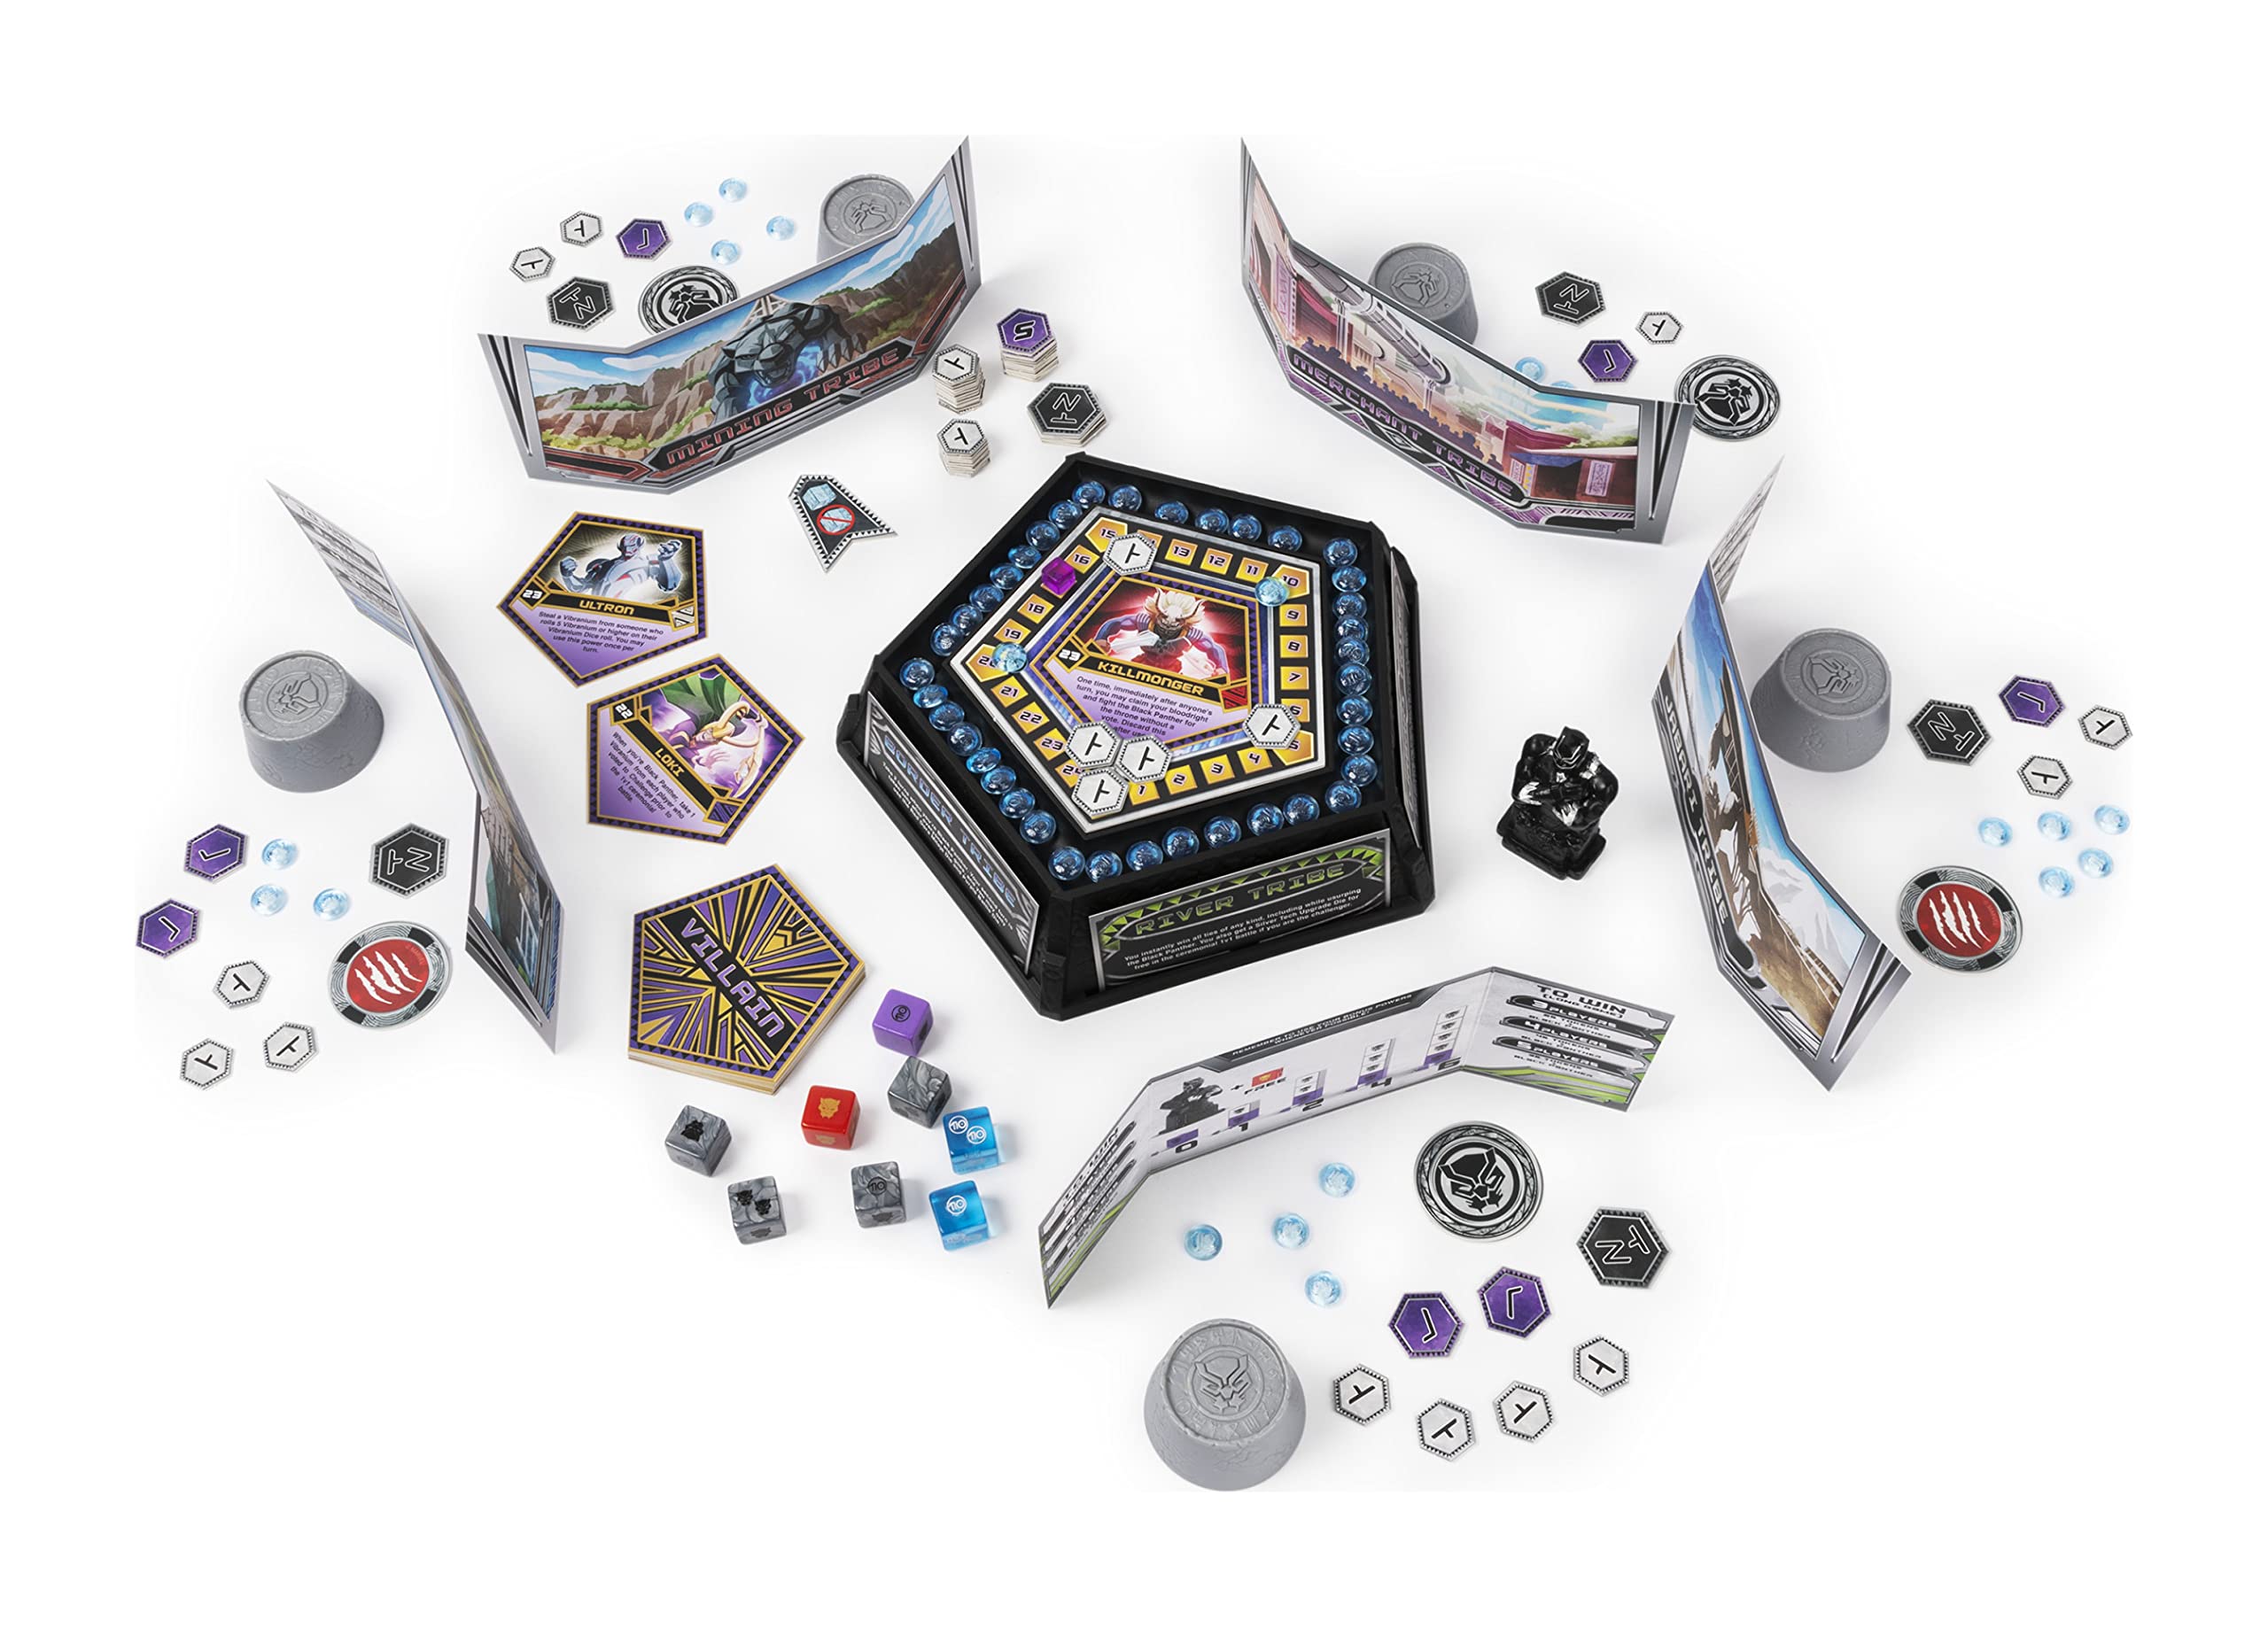 Spin Master Games Marvel Wakanda Forever, Black Panther Dice-Rolling Game for Families, Teens and Adults